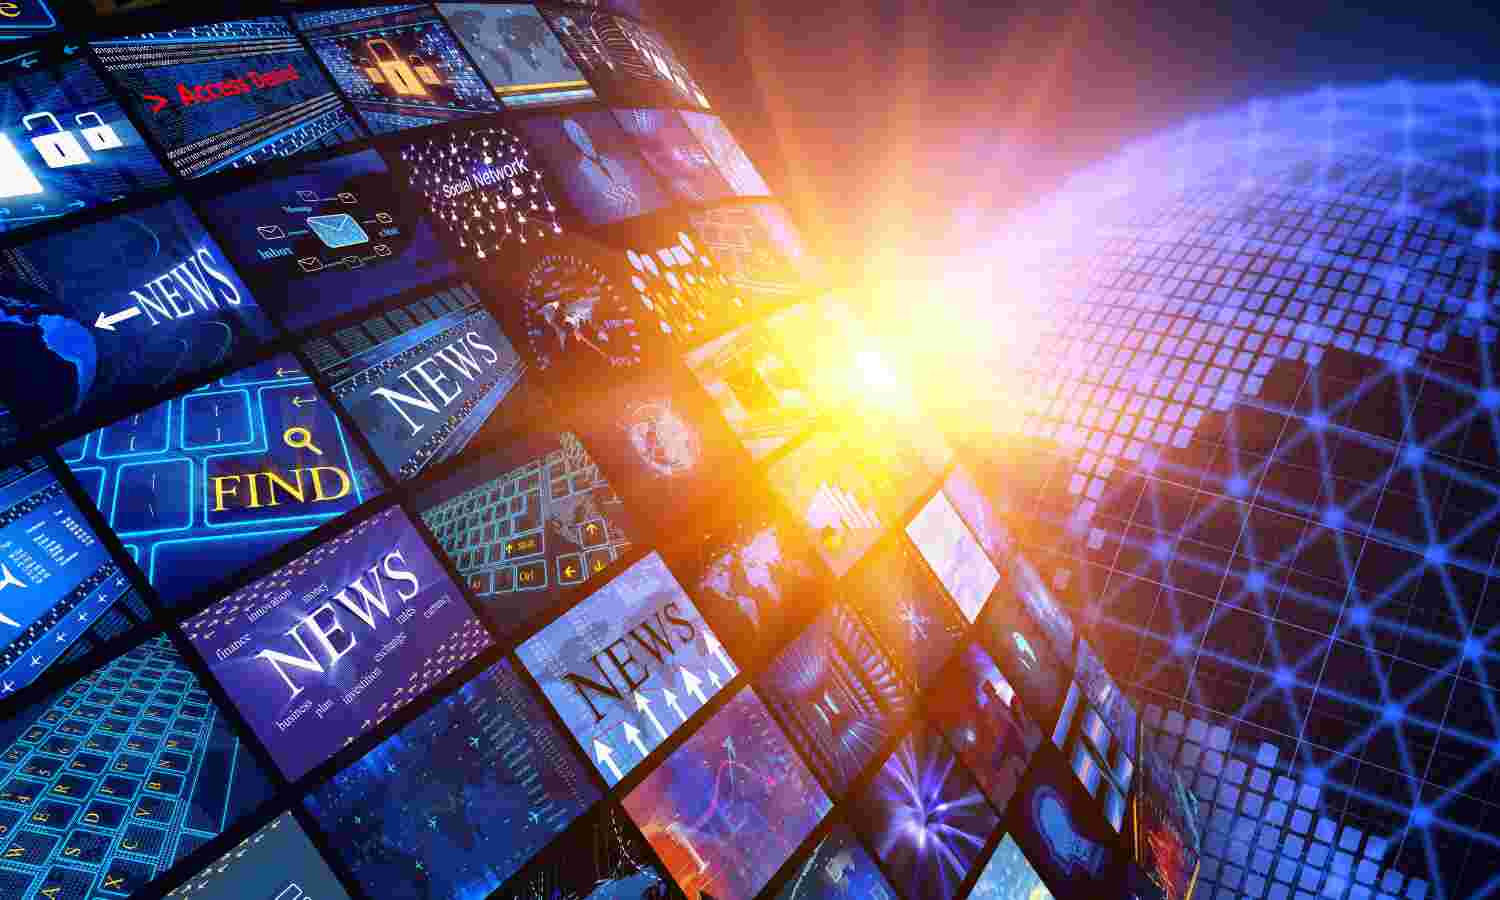 Journalism, Media, and Technology Trends 2023 by Reuters